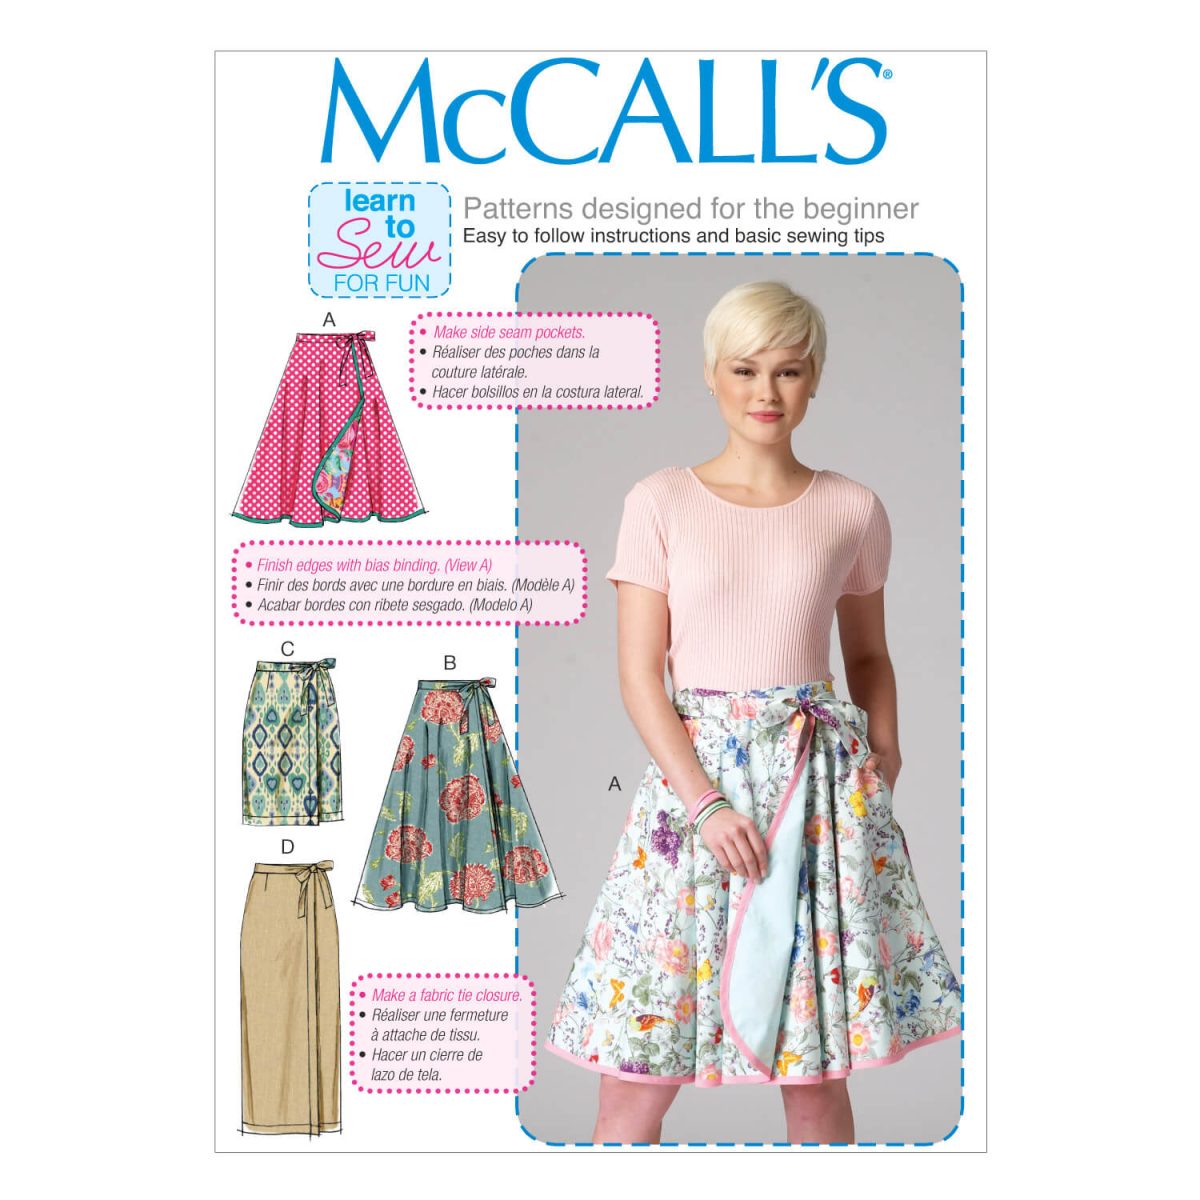 McCall's Sewing Pattern M7129 Misses' Skirts